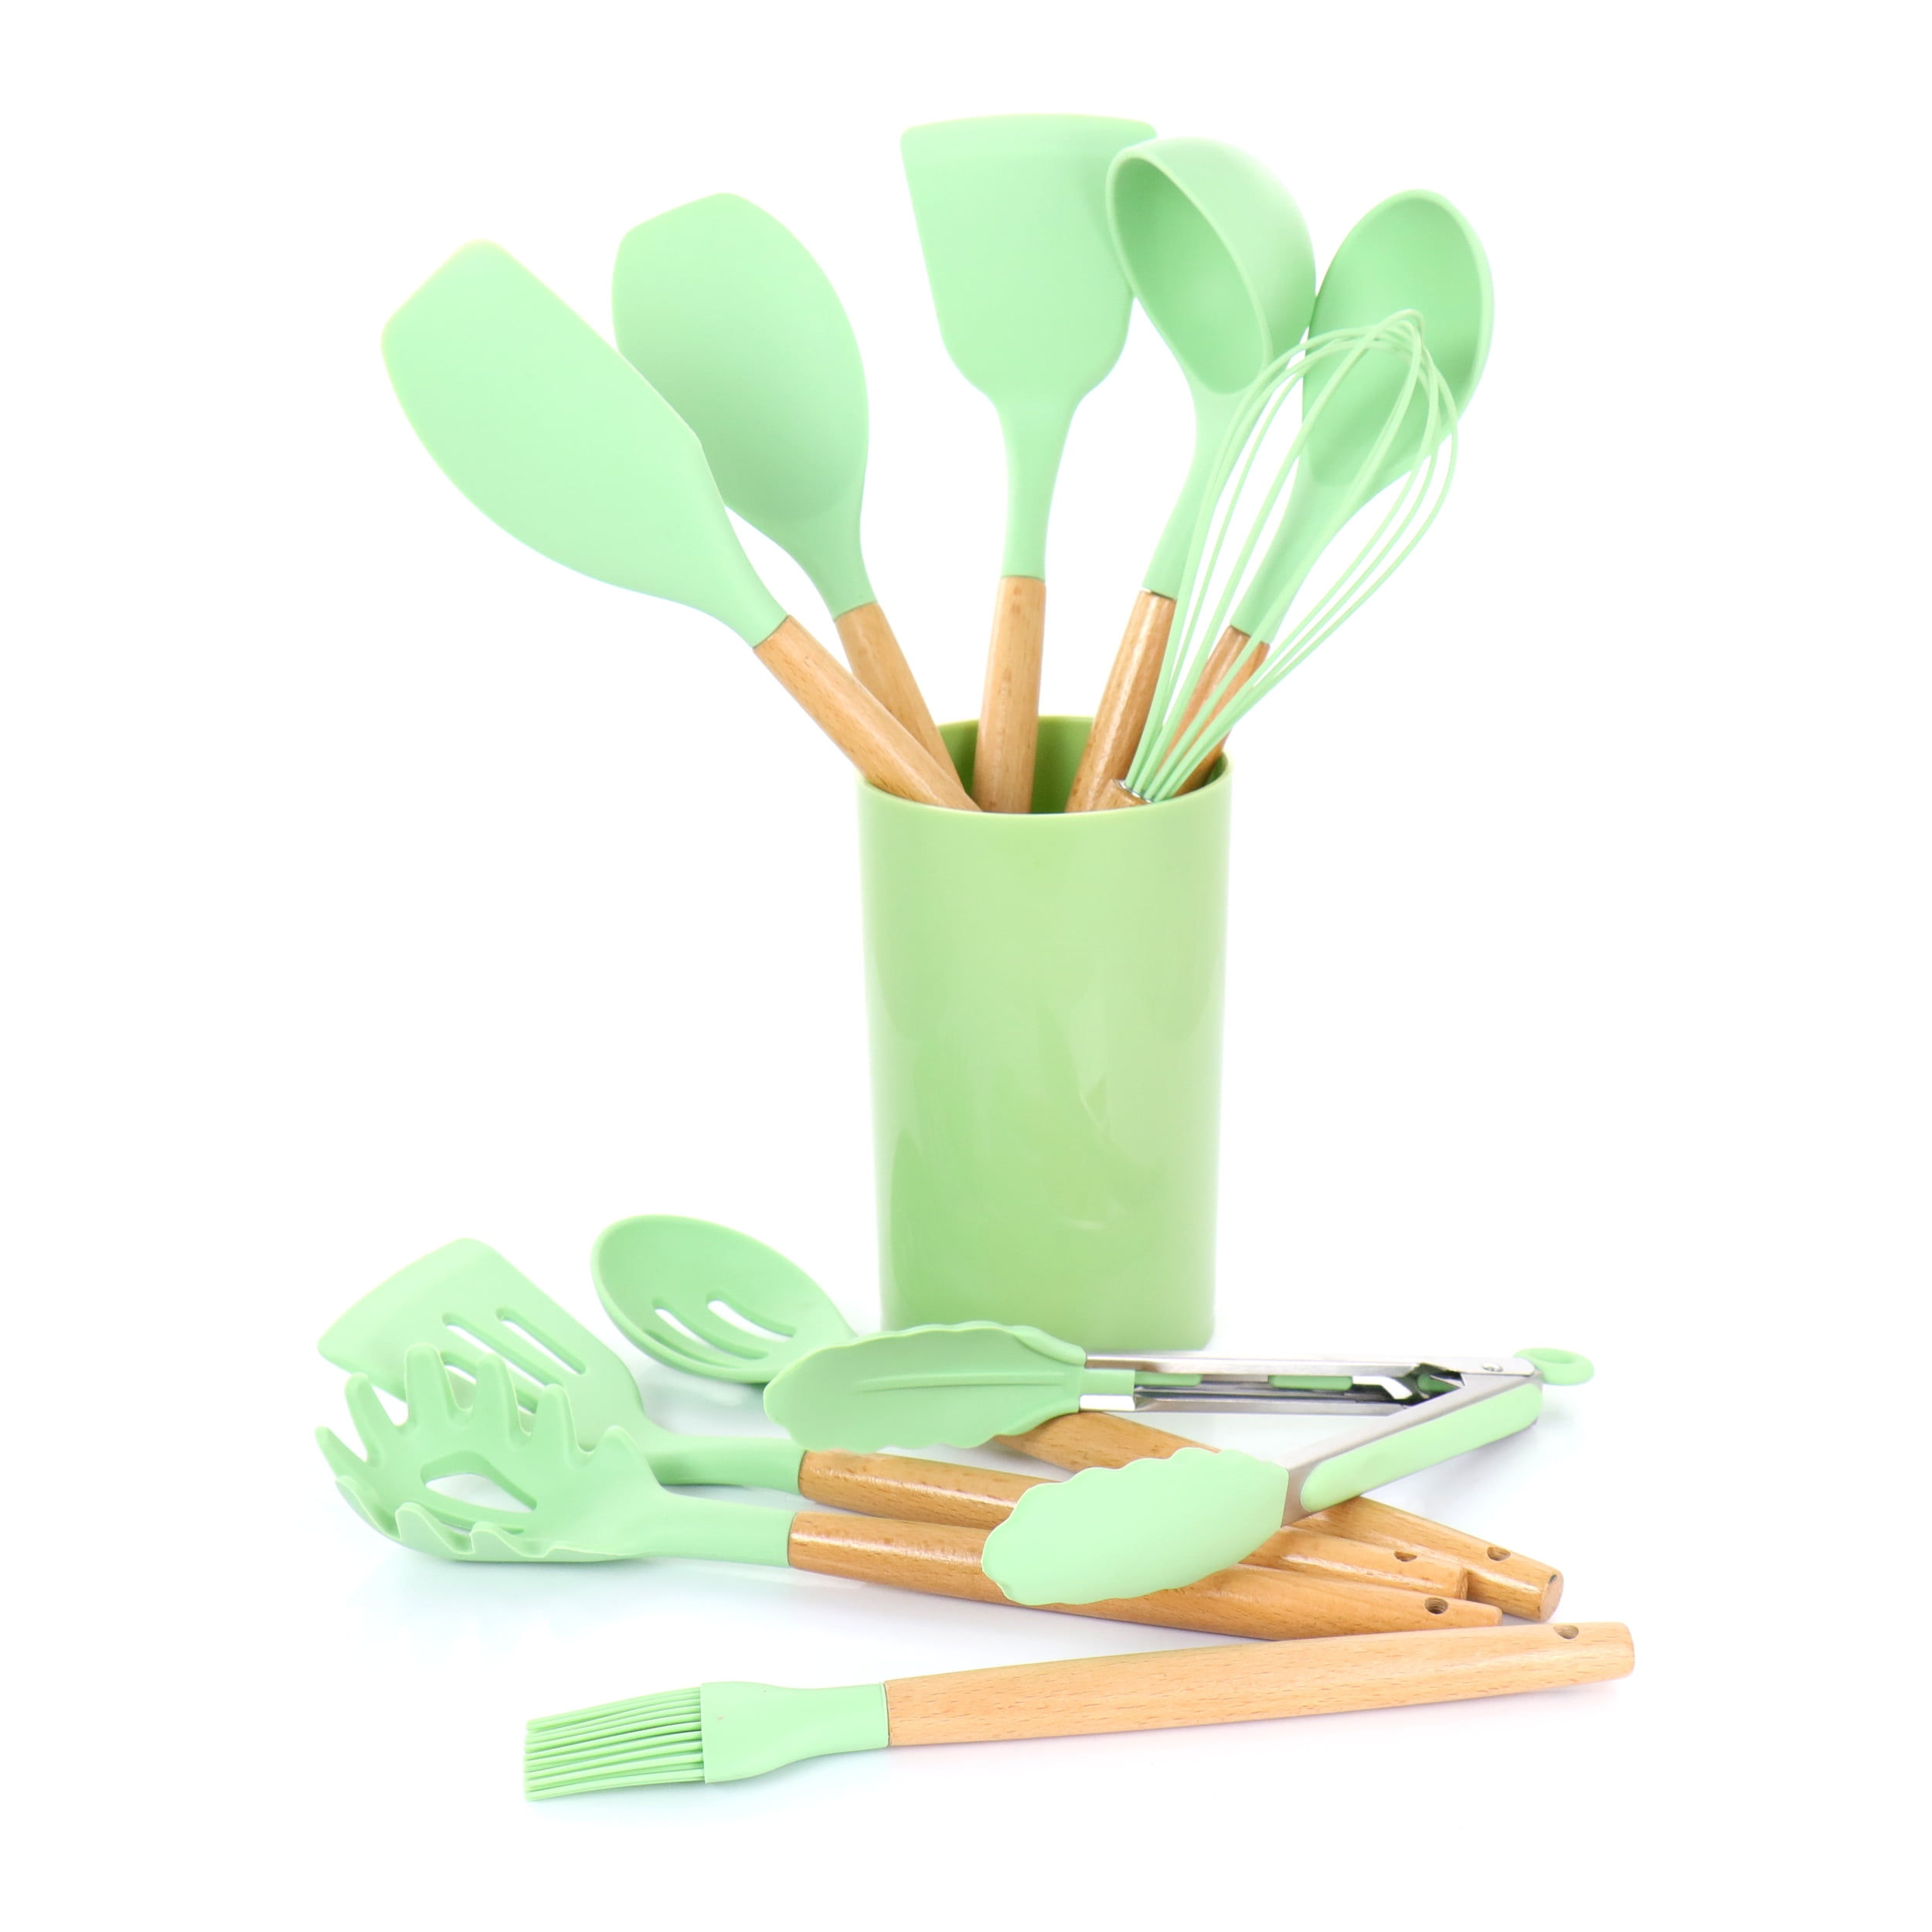 MegaChef Gray Silicone and Stainless Steel Cooking Utensils Set of 14